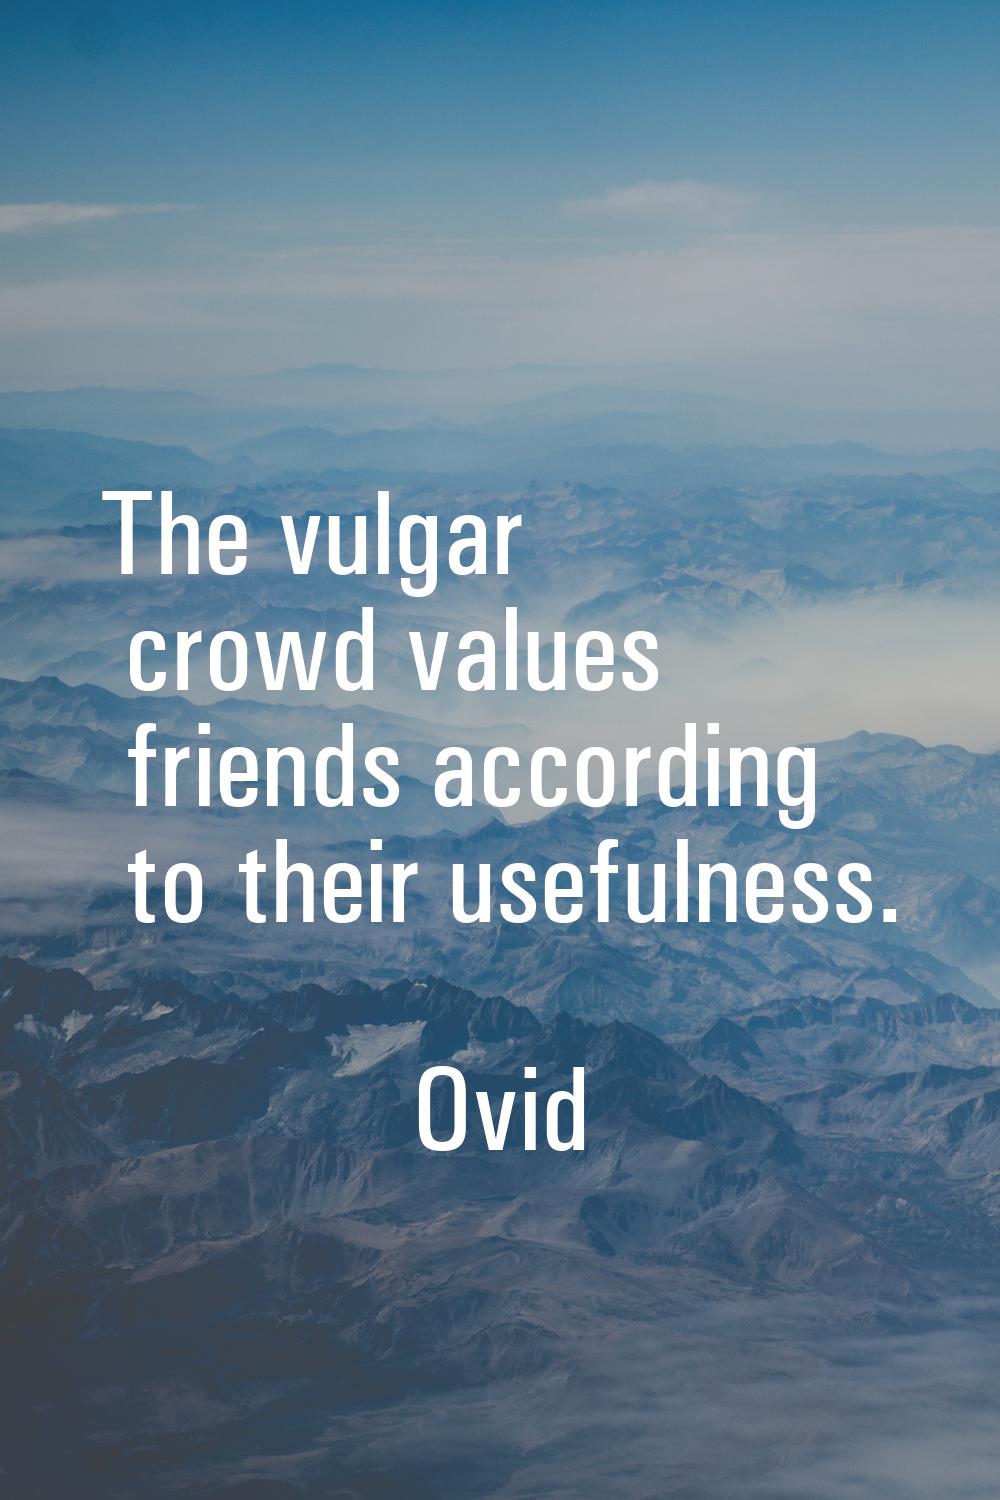 The vulgar crowd values friends according to their usefulness.